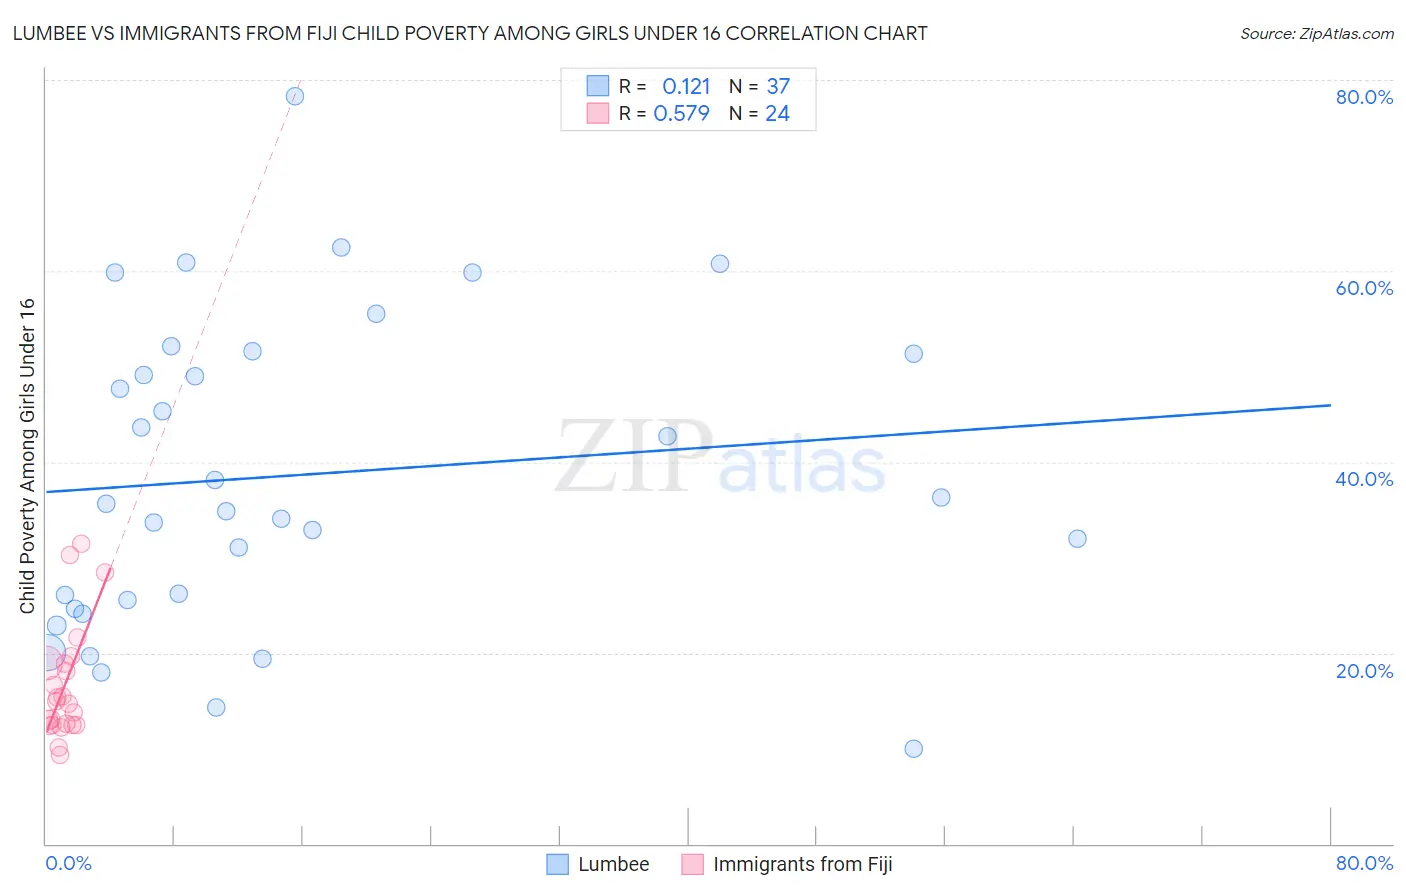 Lumbee vs Immigrants from Fiji Child Poverty Among Girls Under 16